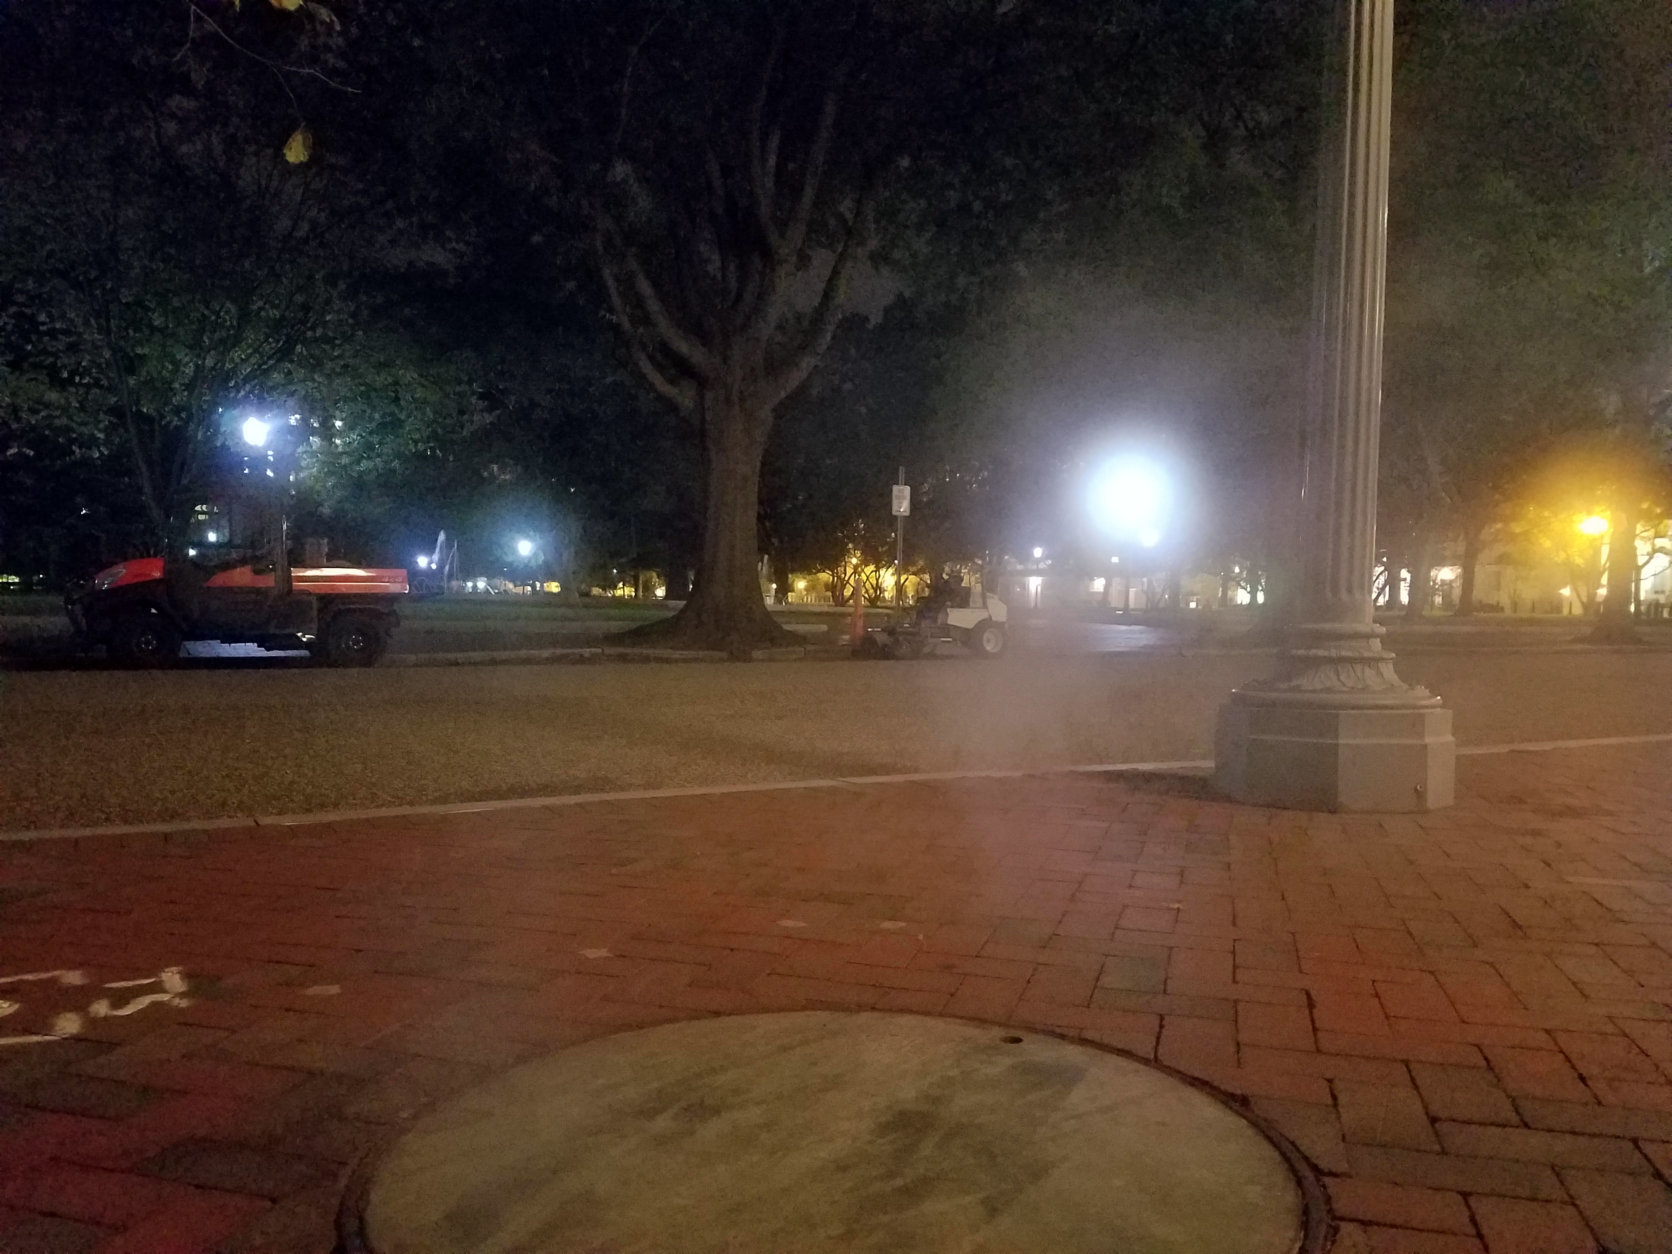 While no ghosts were seen around Lafayette Square, the rats sure did make themselves known. (WTOP/Will Vitka)